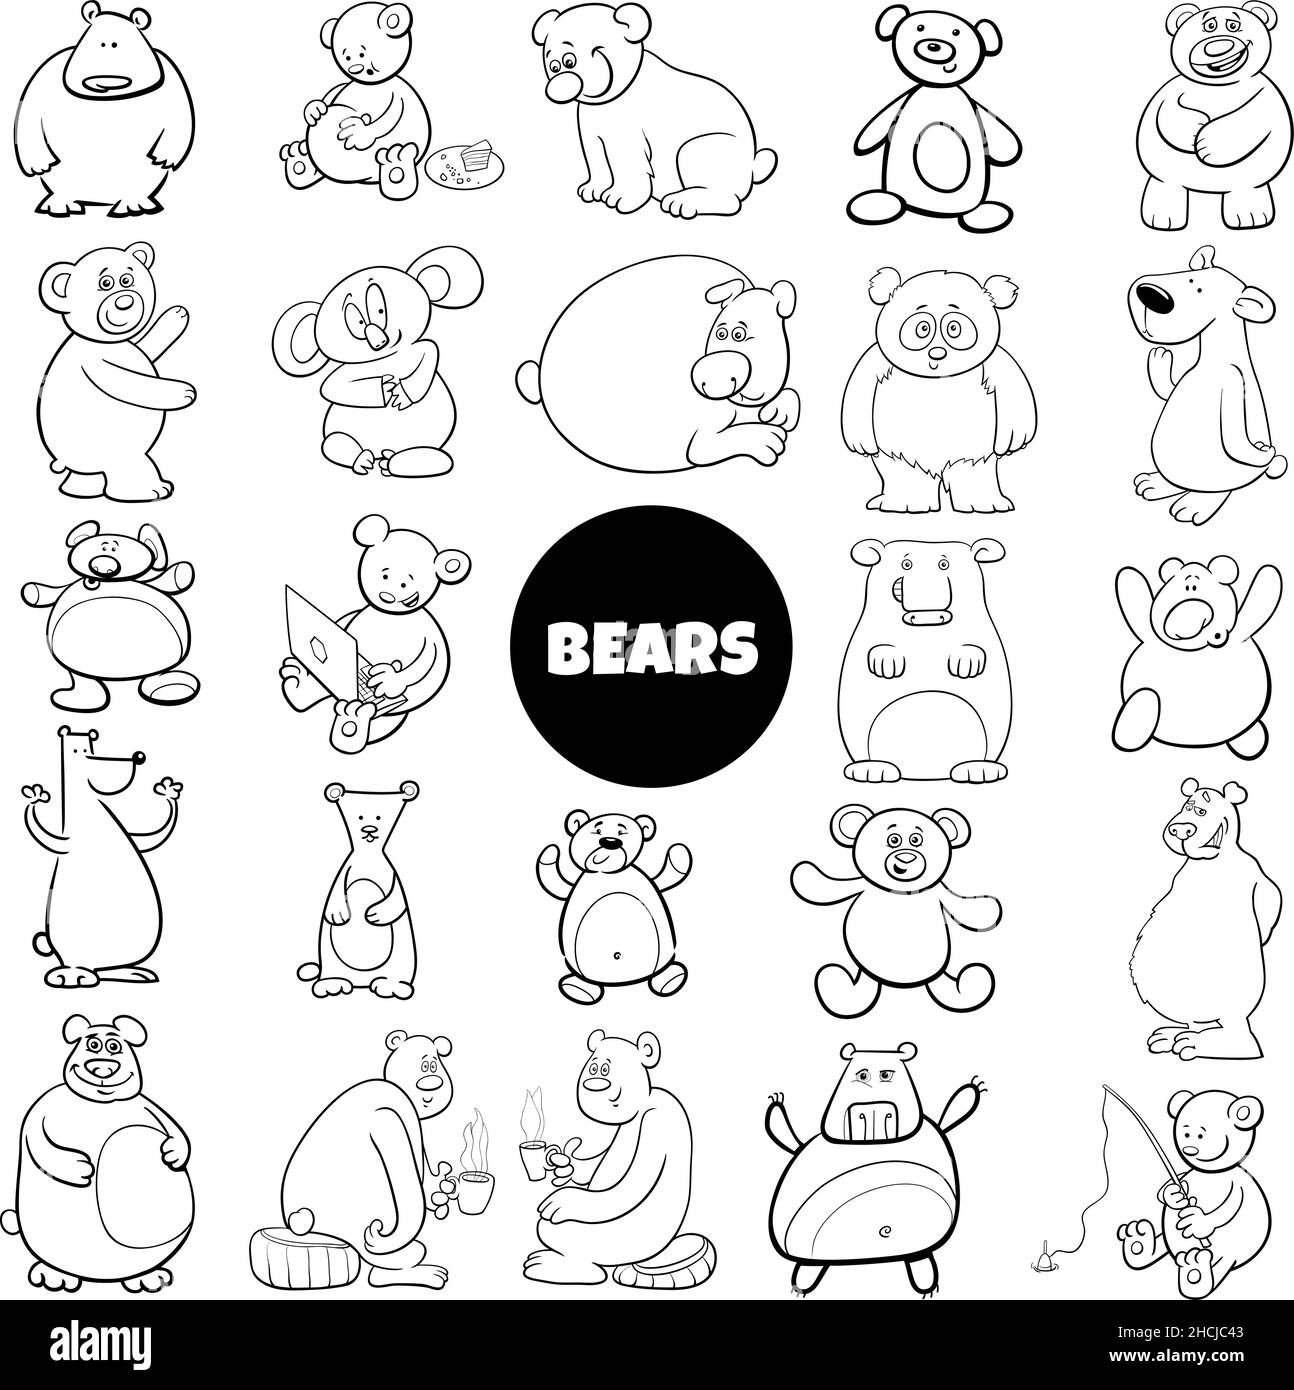 Black and white cartoon illustration of bears animal characters big set coloring book page Stock Vector